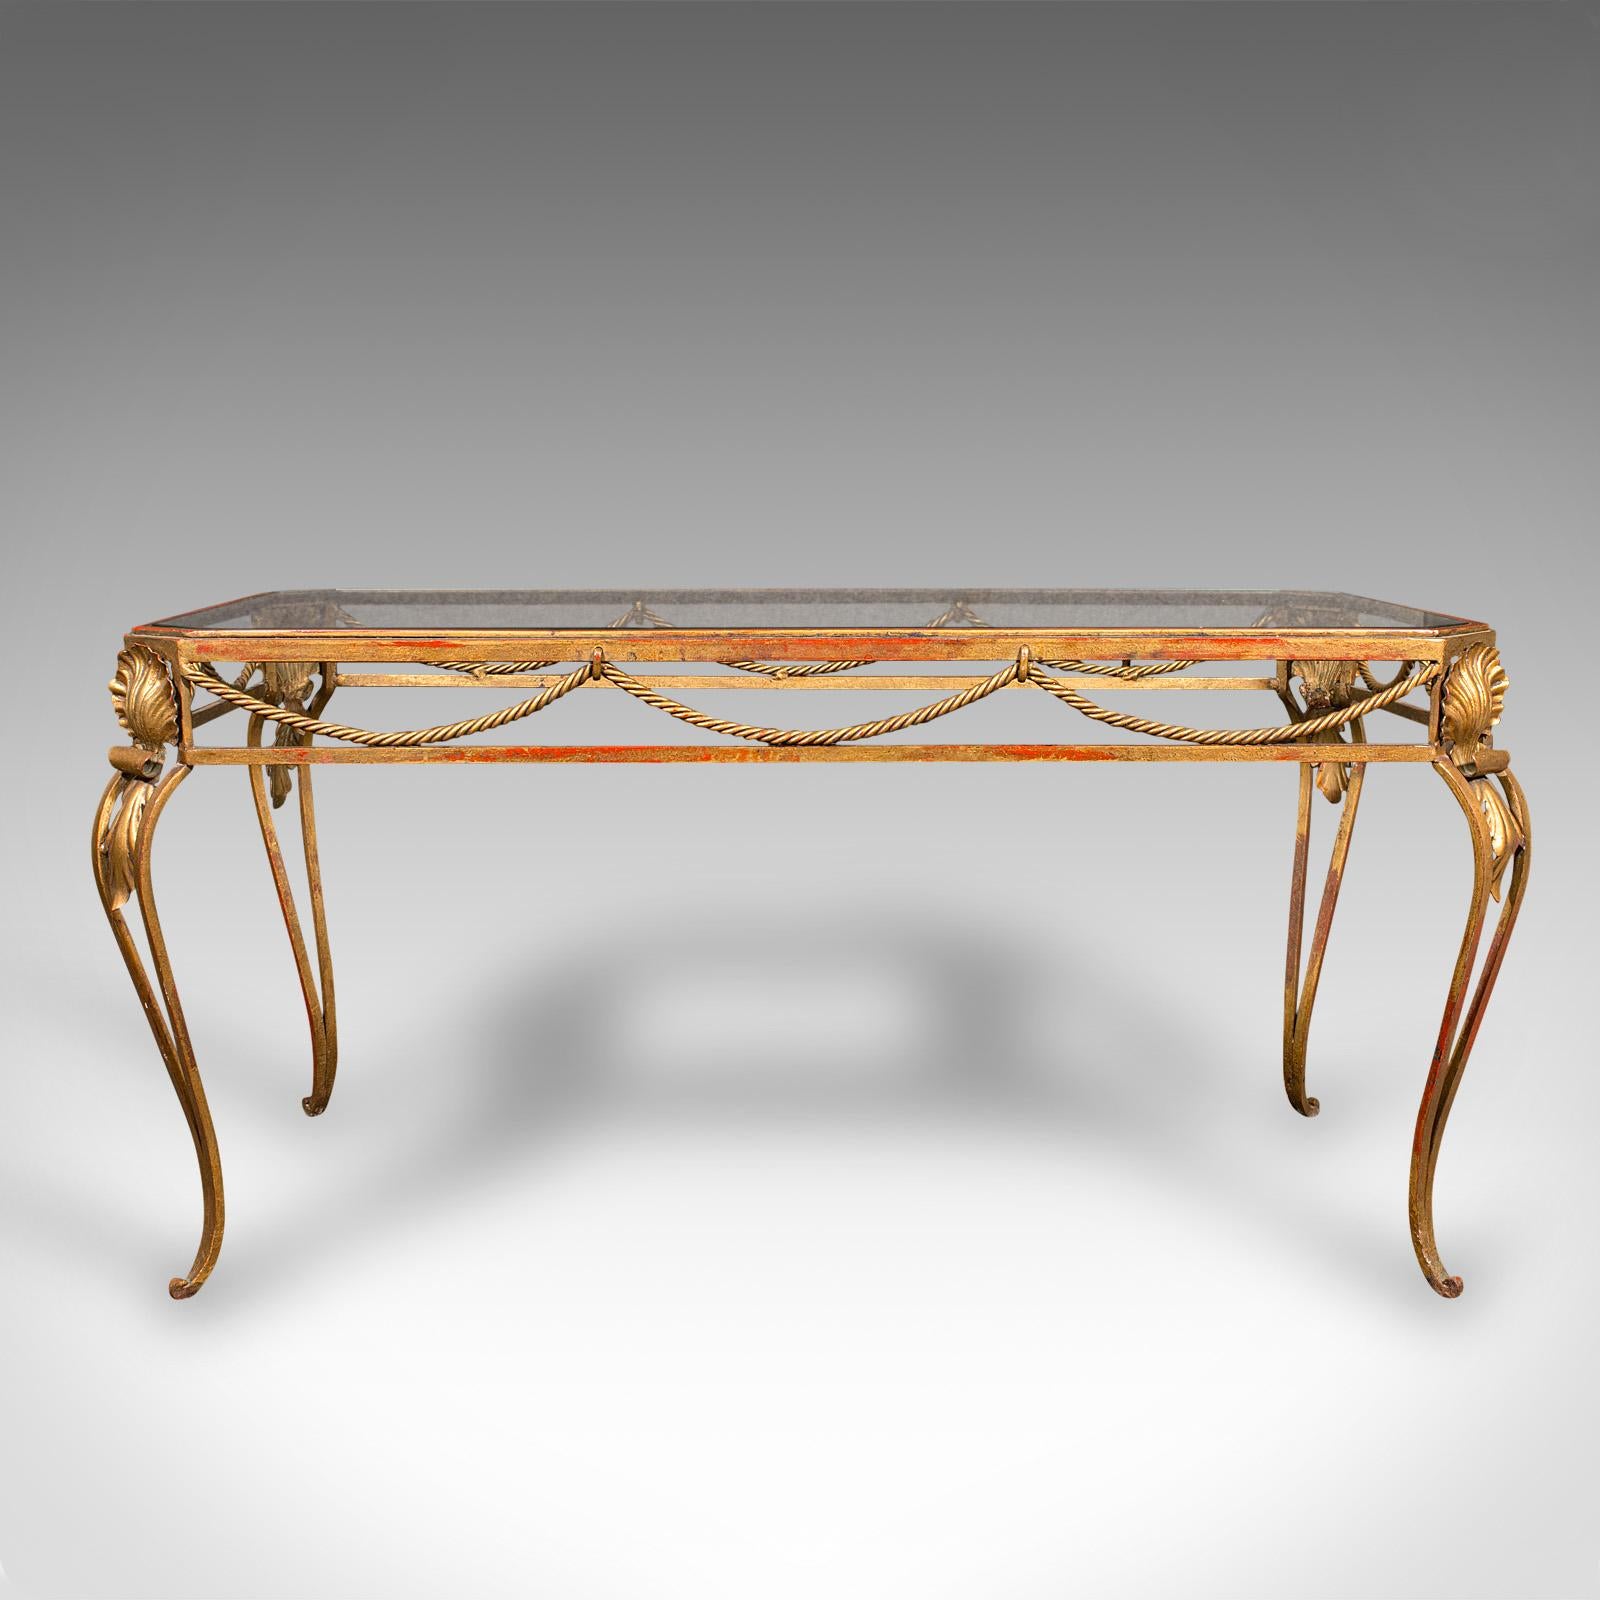 This is an antique glazed coffee table. A French, brass framed accent table in Art Nouveau taste, dating to the early 20th century, circa 1920.

Striking appearance and of superb Art Nouveau appeal
Displays a desirable aged patina throughout
Brass